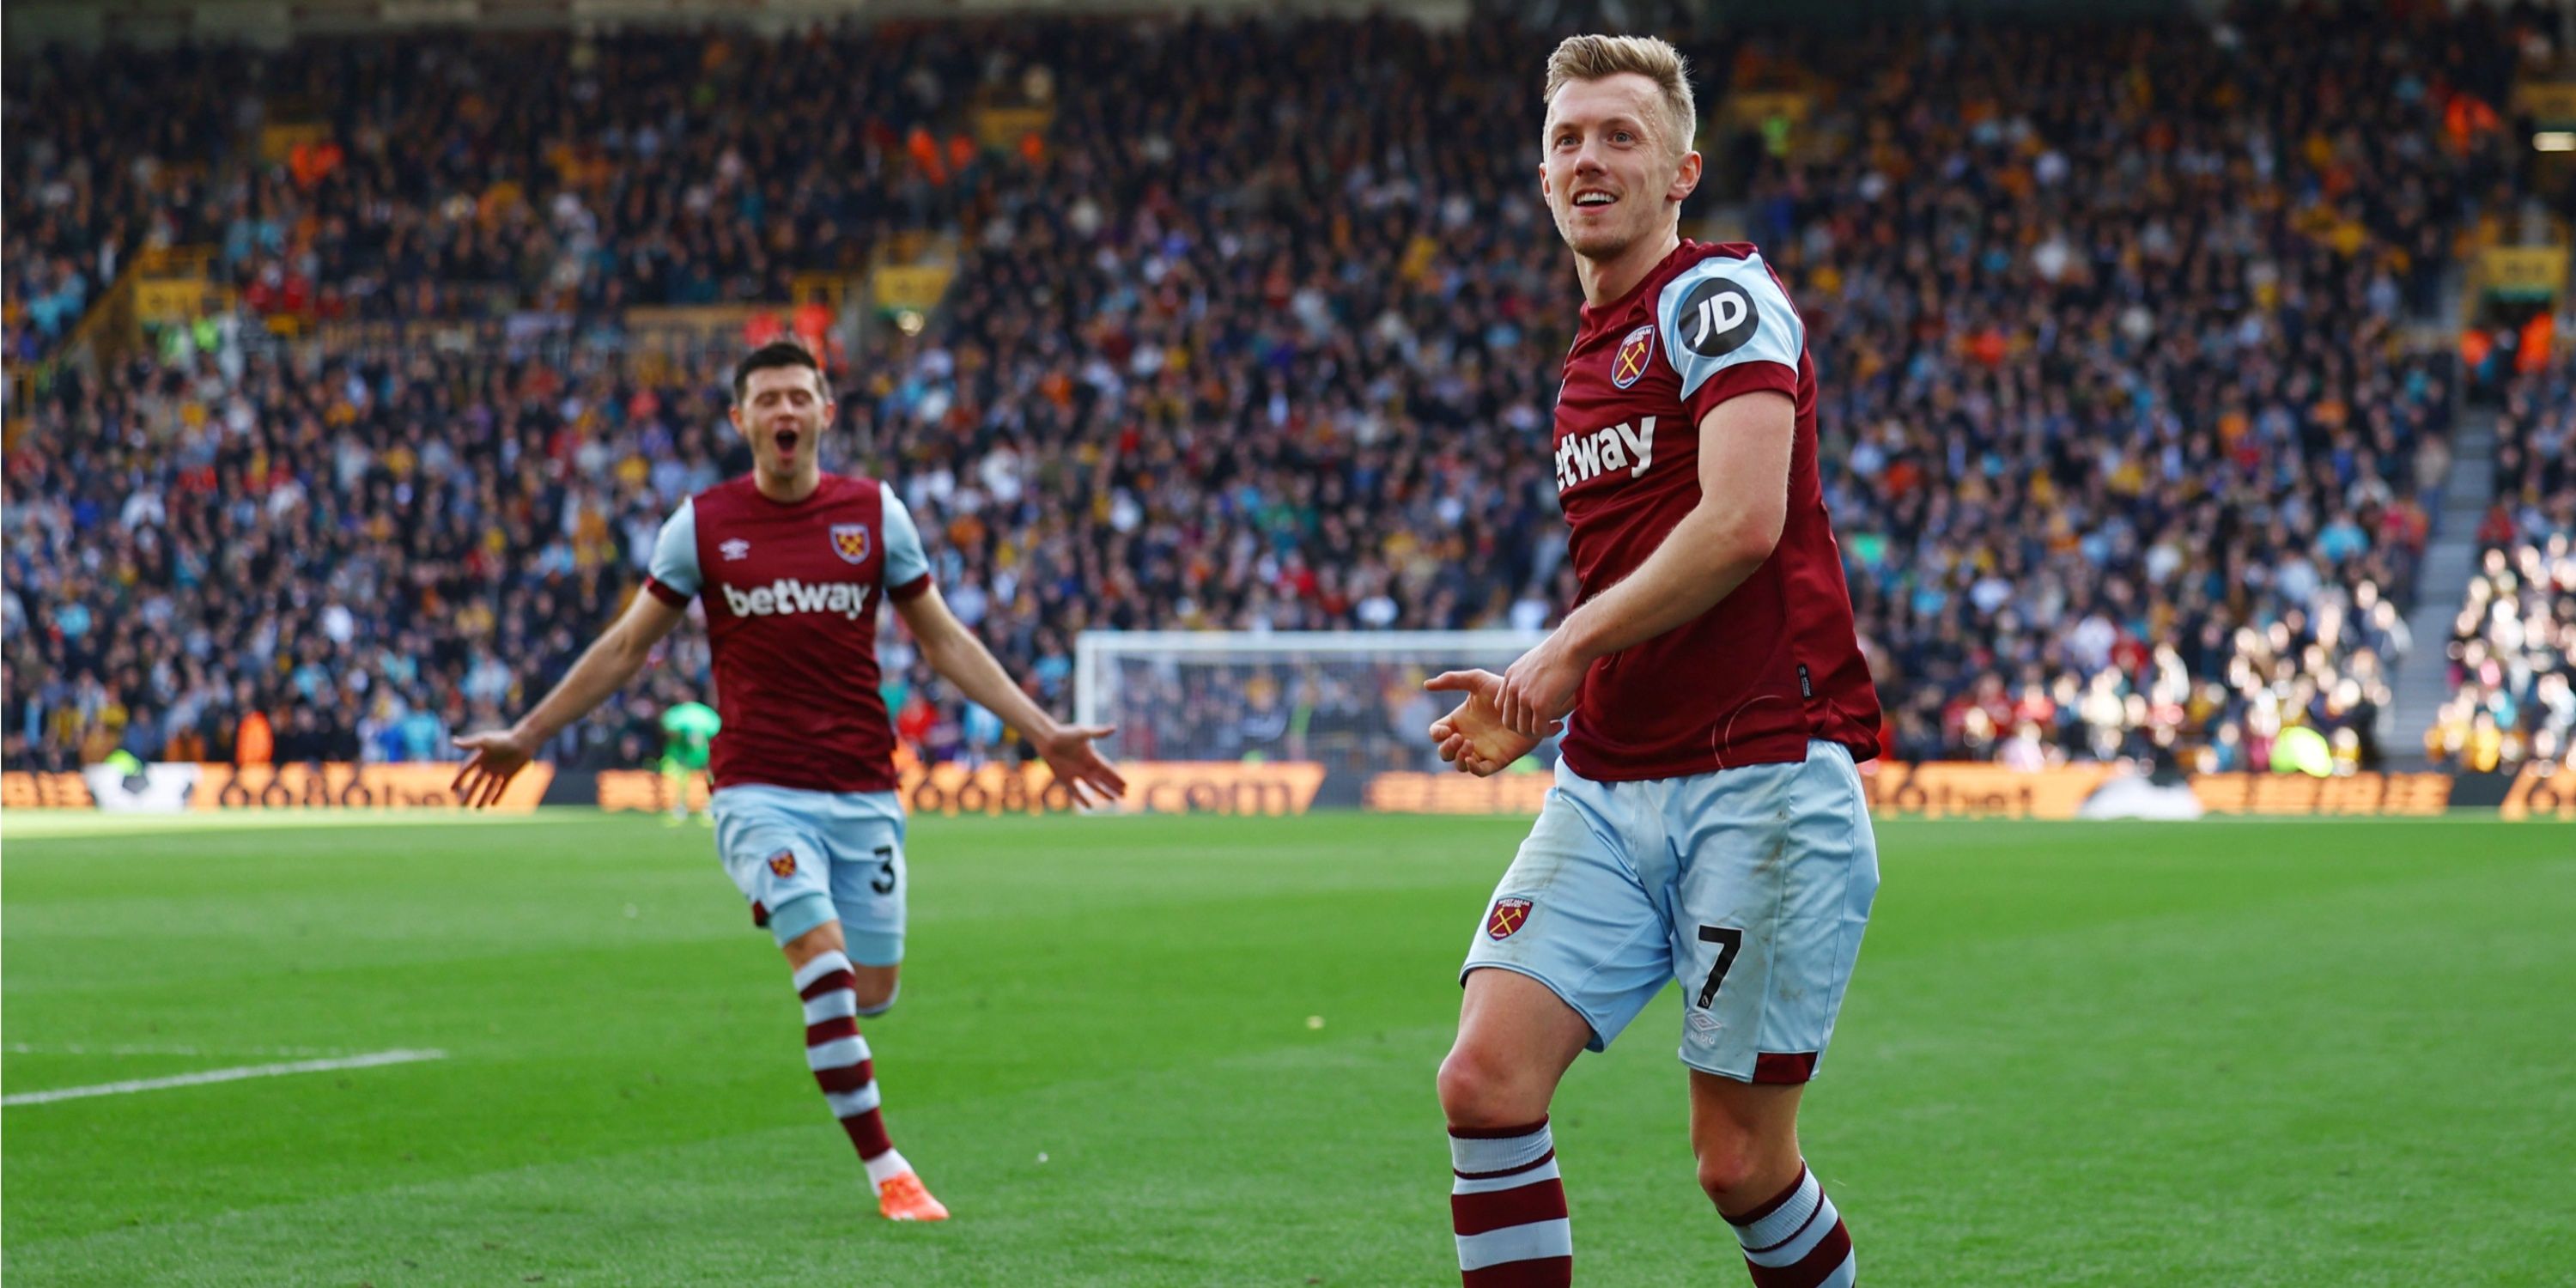 James Ward-Prowse scores from a corner for West Ham